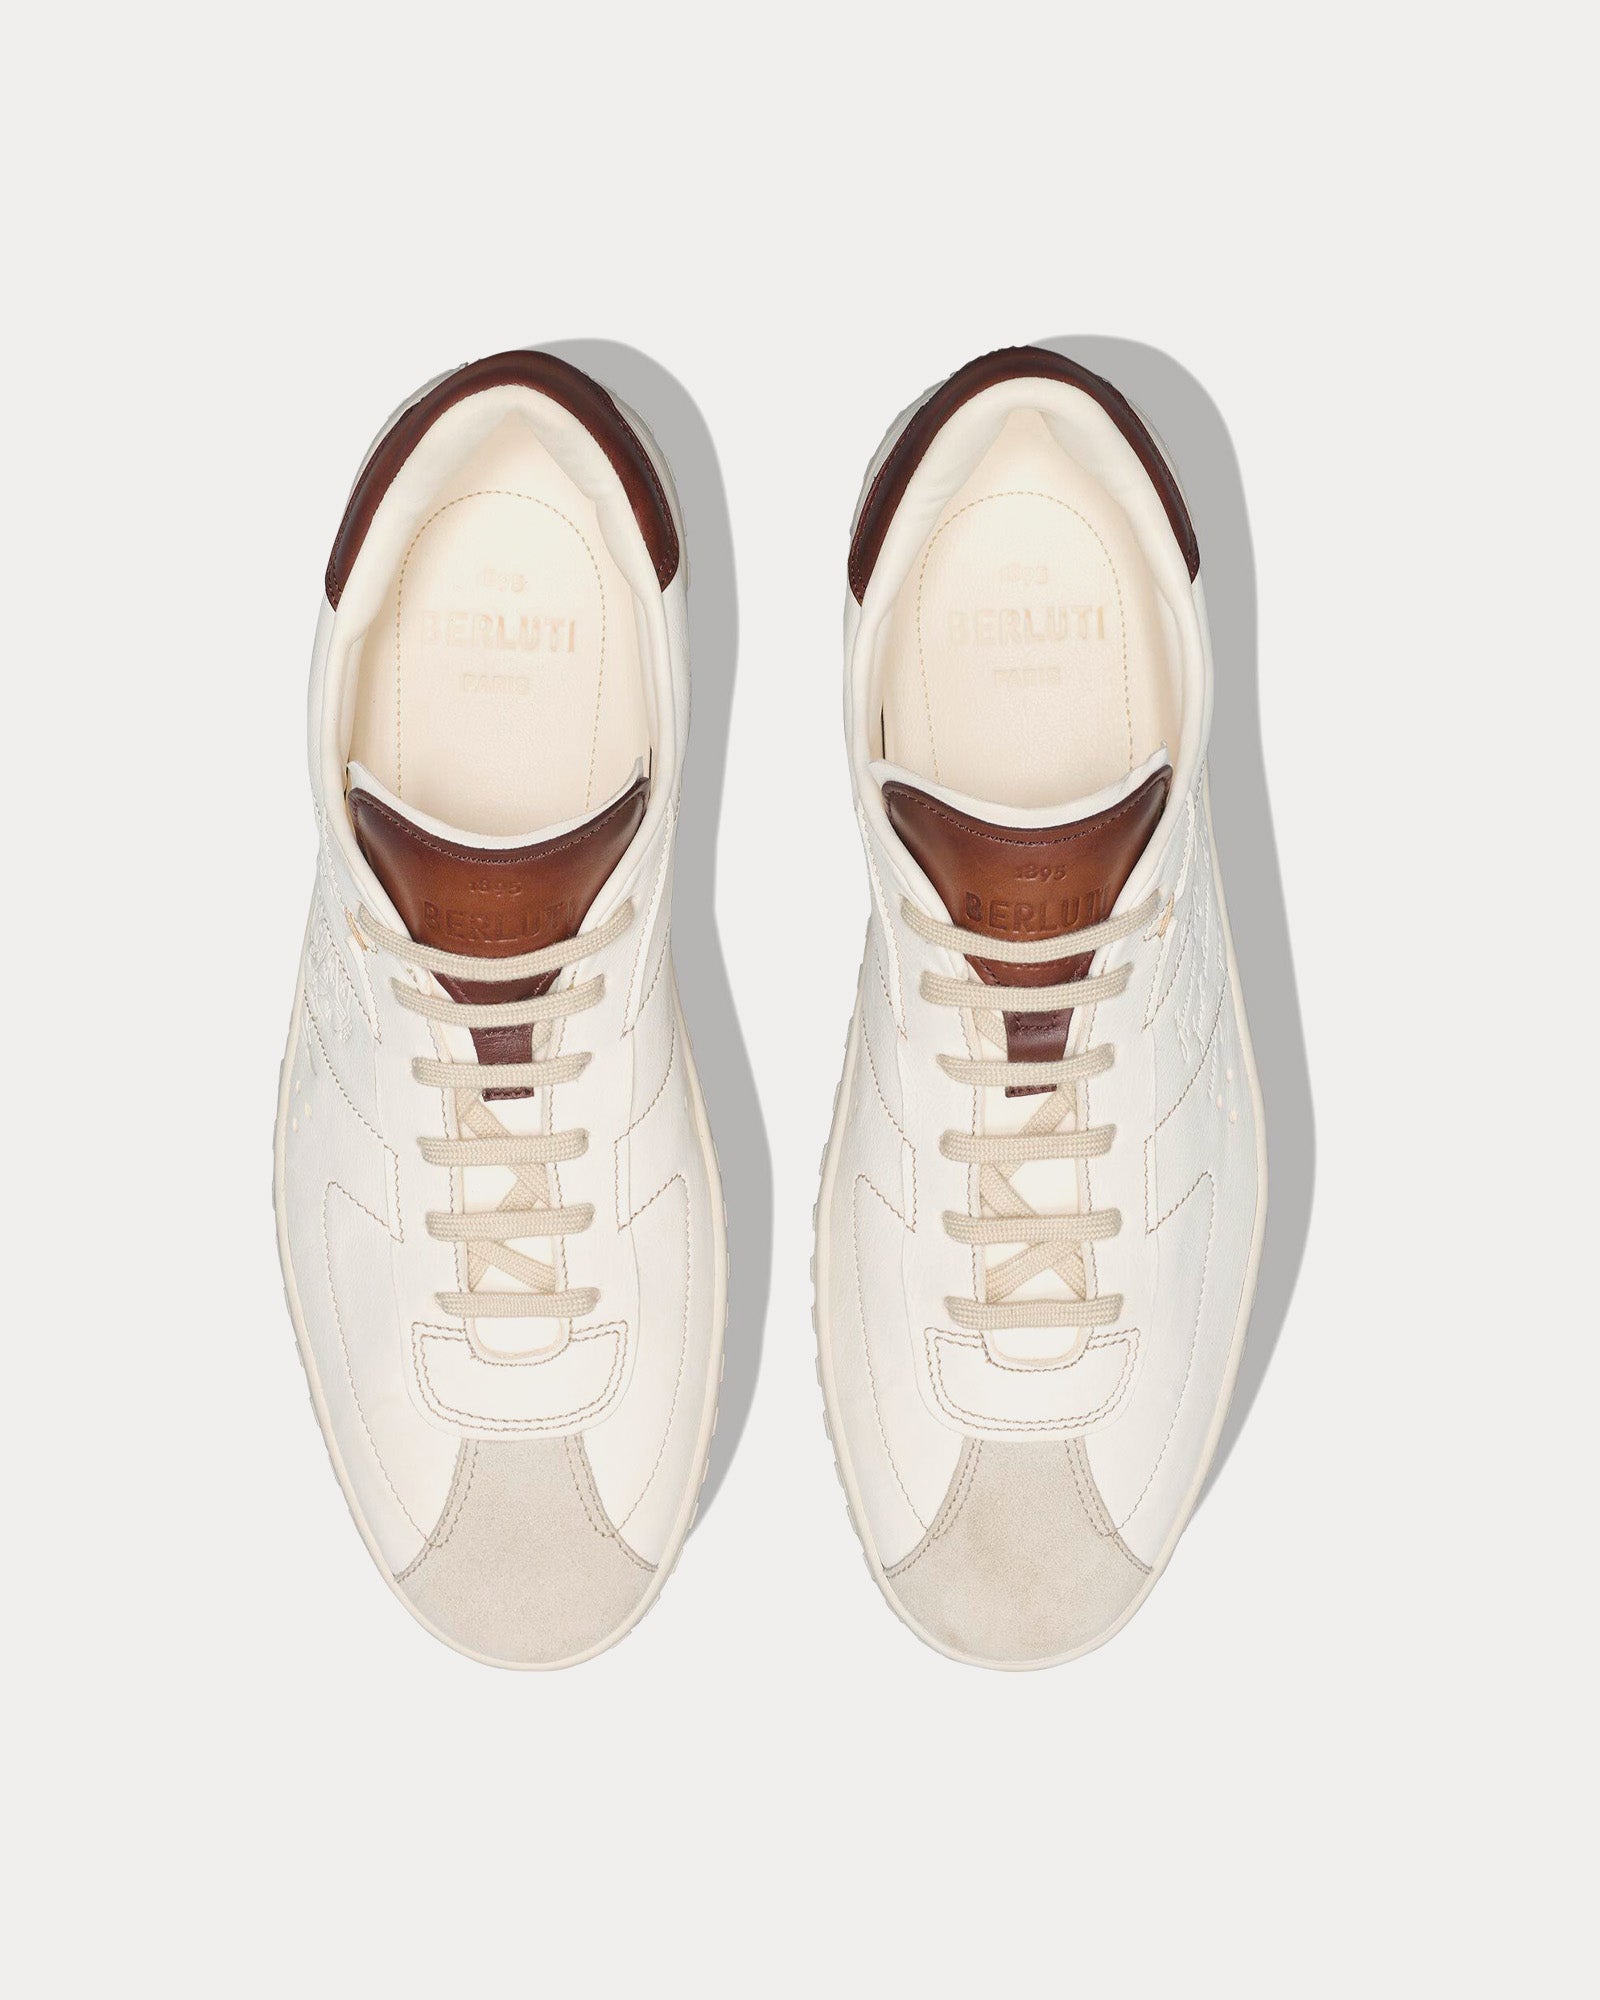 Berluti - Scritto Leather & Suede White Low Top Sneakers